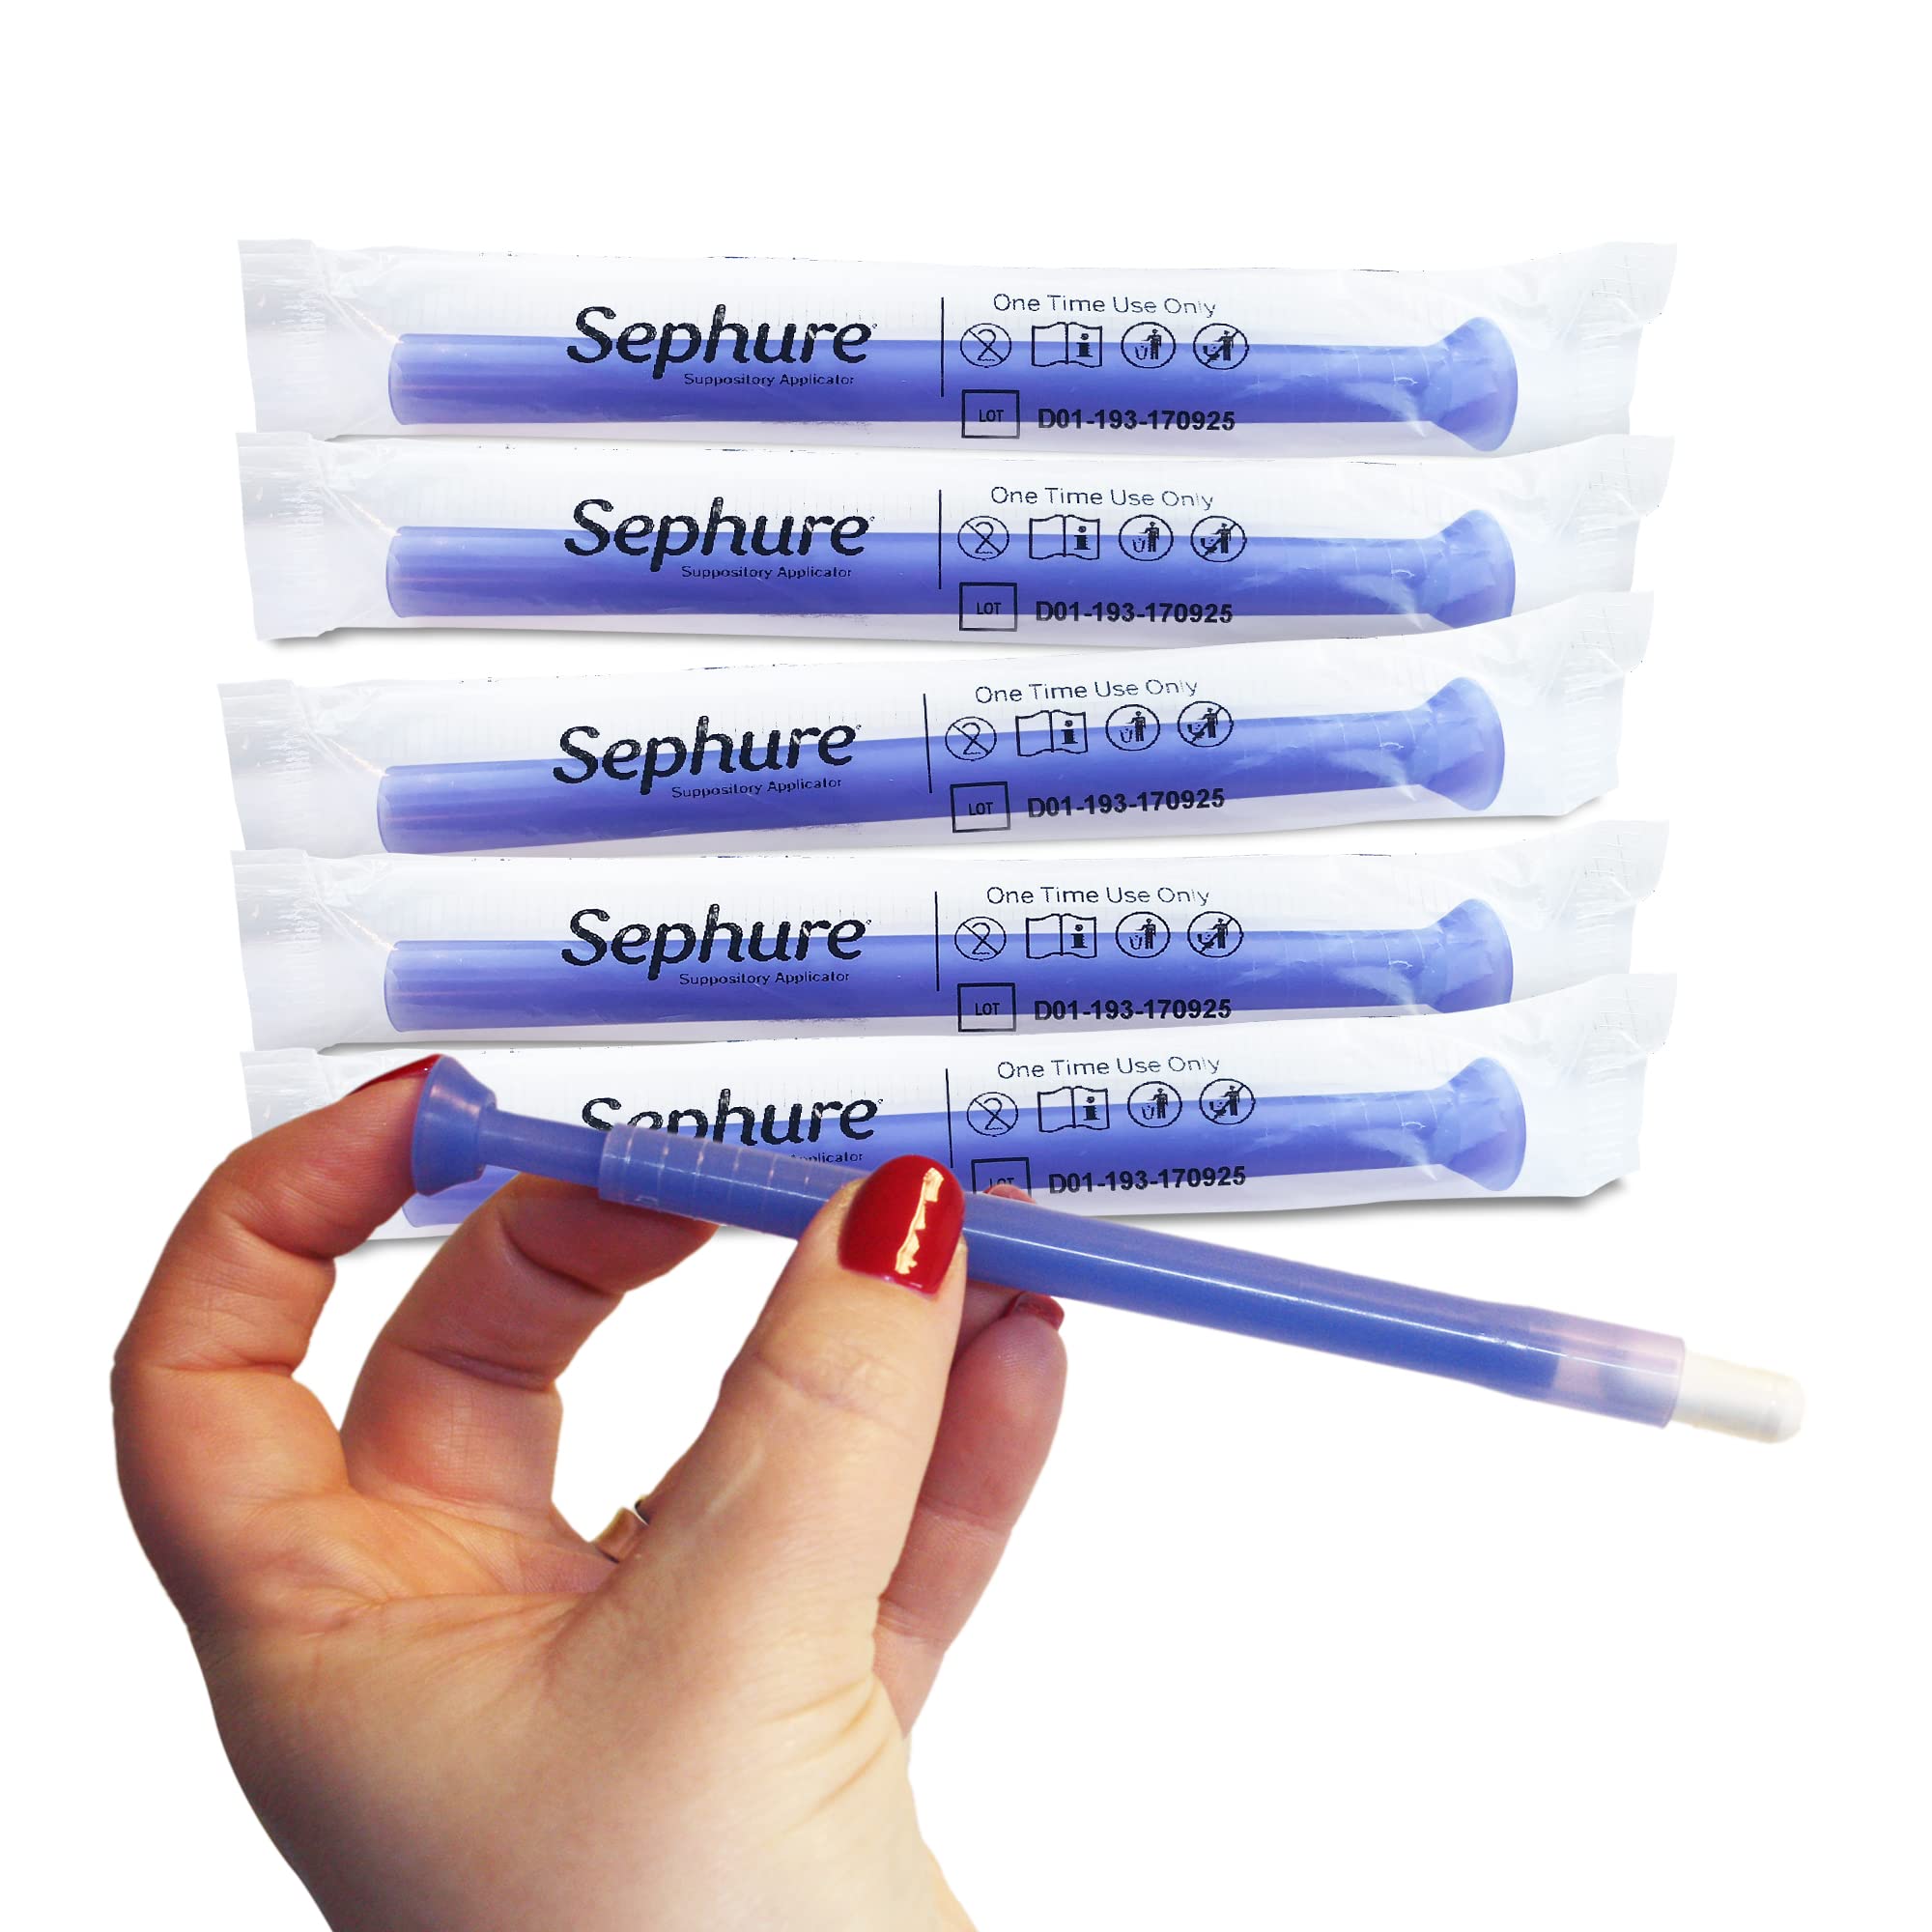 Sephure Easy To Use Suppository Applicator For Women Disposable Vaginal Applicator For